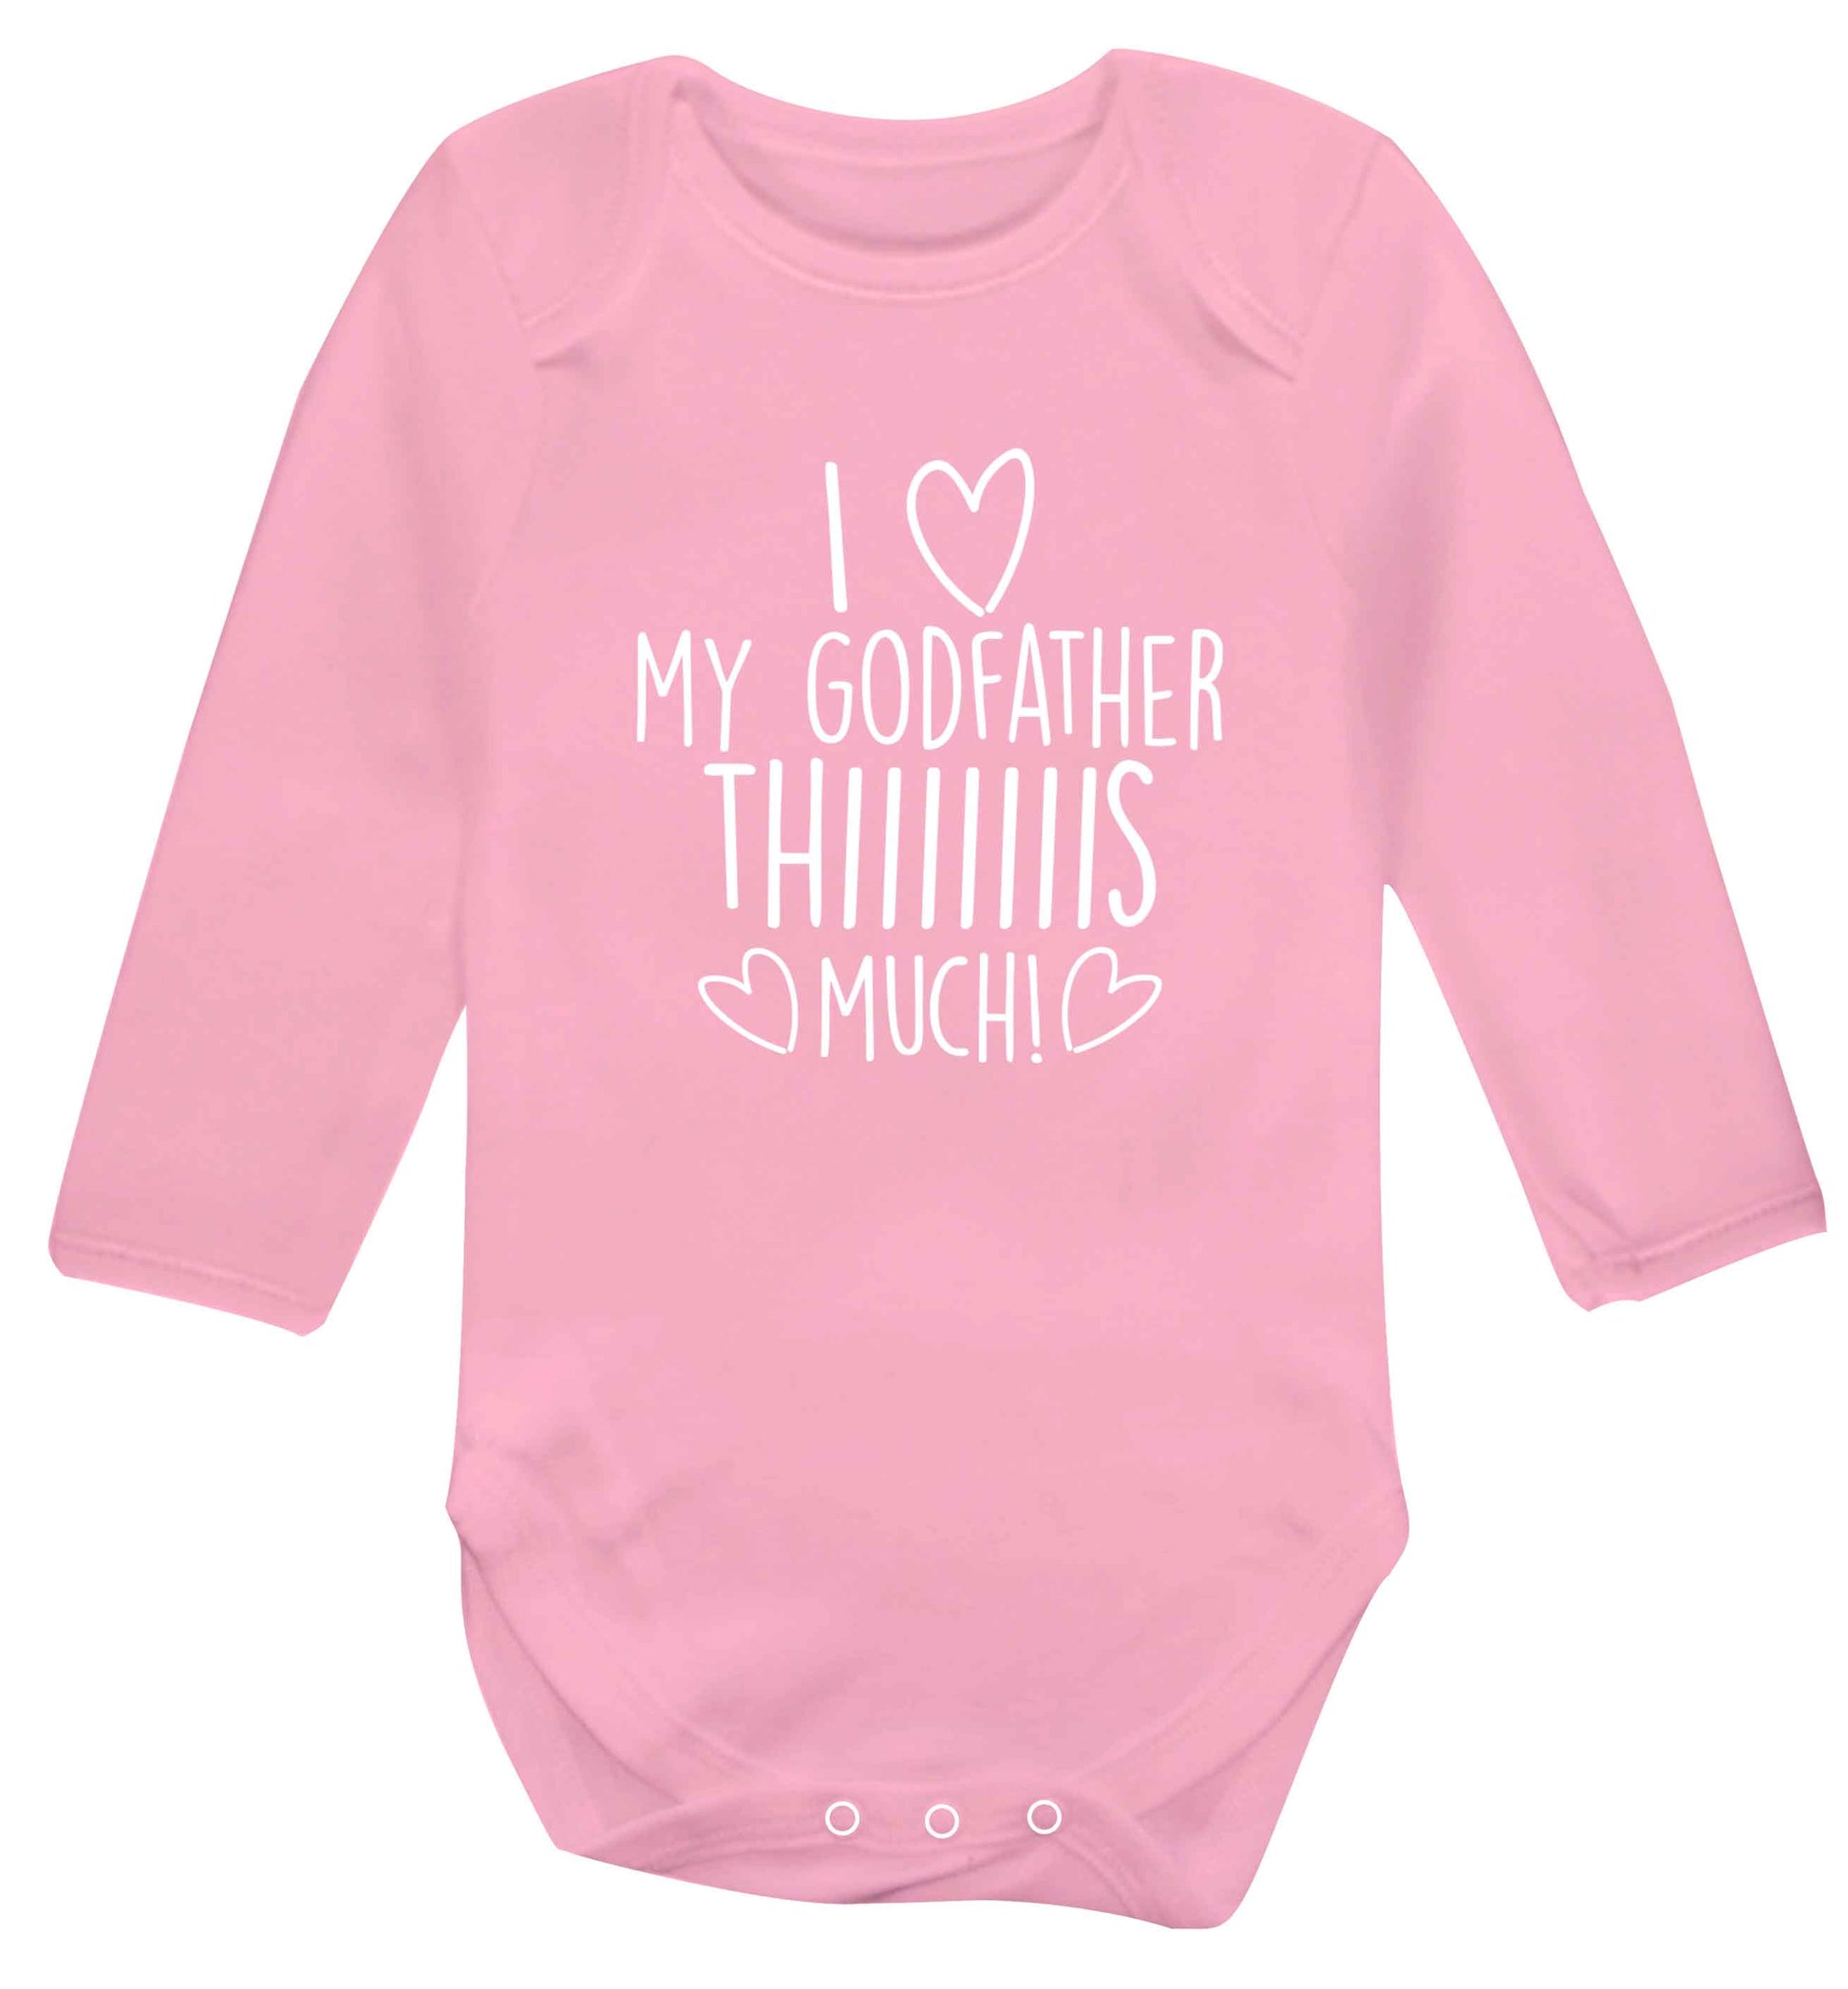 I love my Godfather this much baby vest long sleeved pale pink 6-12 months